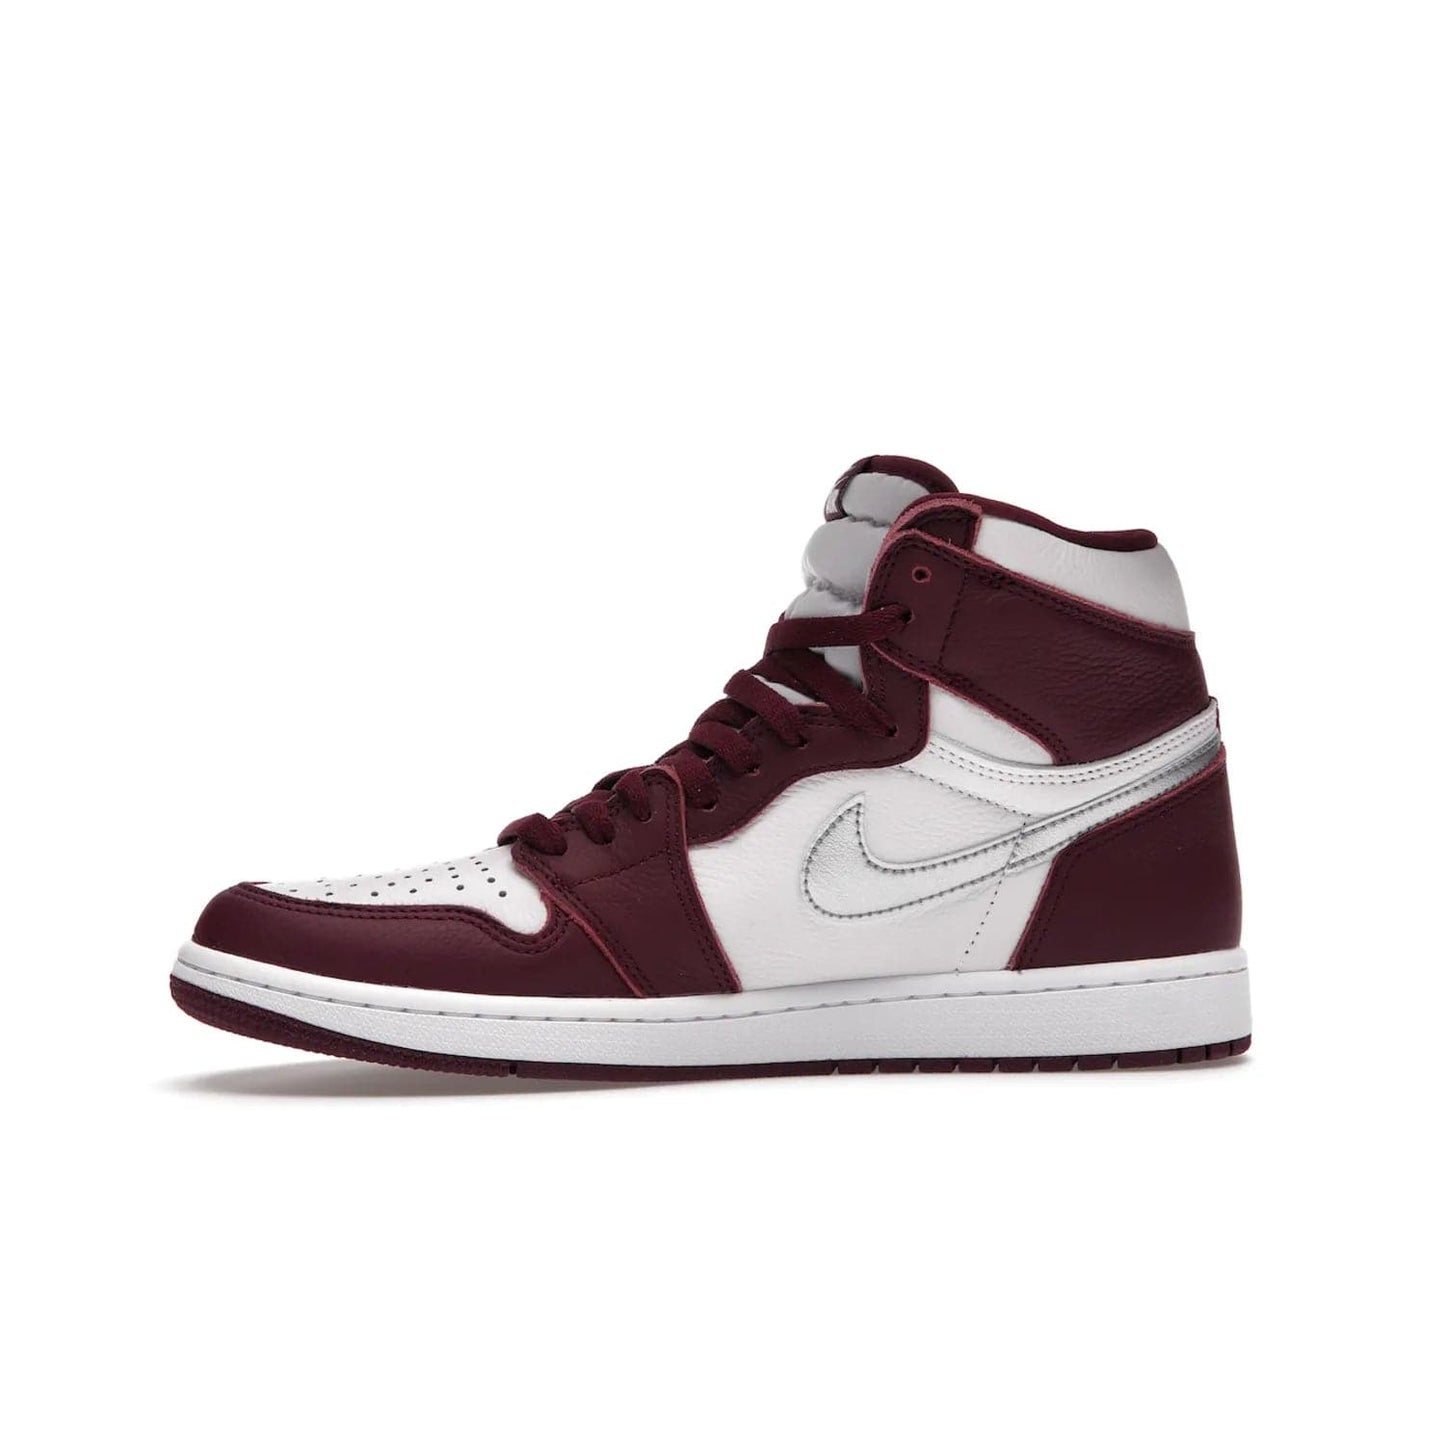 Jordan 1 Retro High OG Bordeaux - Image 18 - Only at www.BallersClubKickz.com - Shop the classic Air Jordan 1 High Bordeaux with a modern high-top cut. The timeless Bordeaux and White-Metallic Silver colorway, releasing Nov 20, 2021, is perfect for practice or a night out.